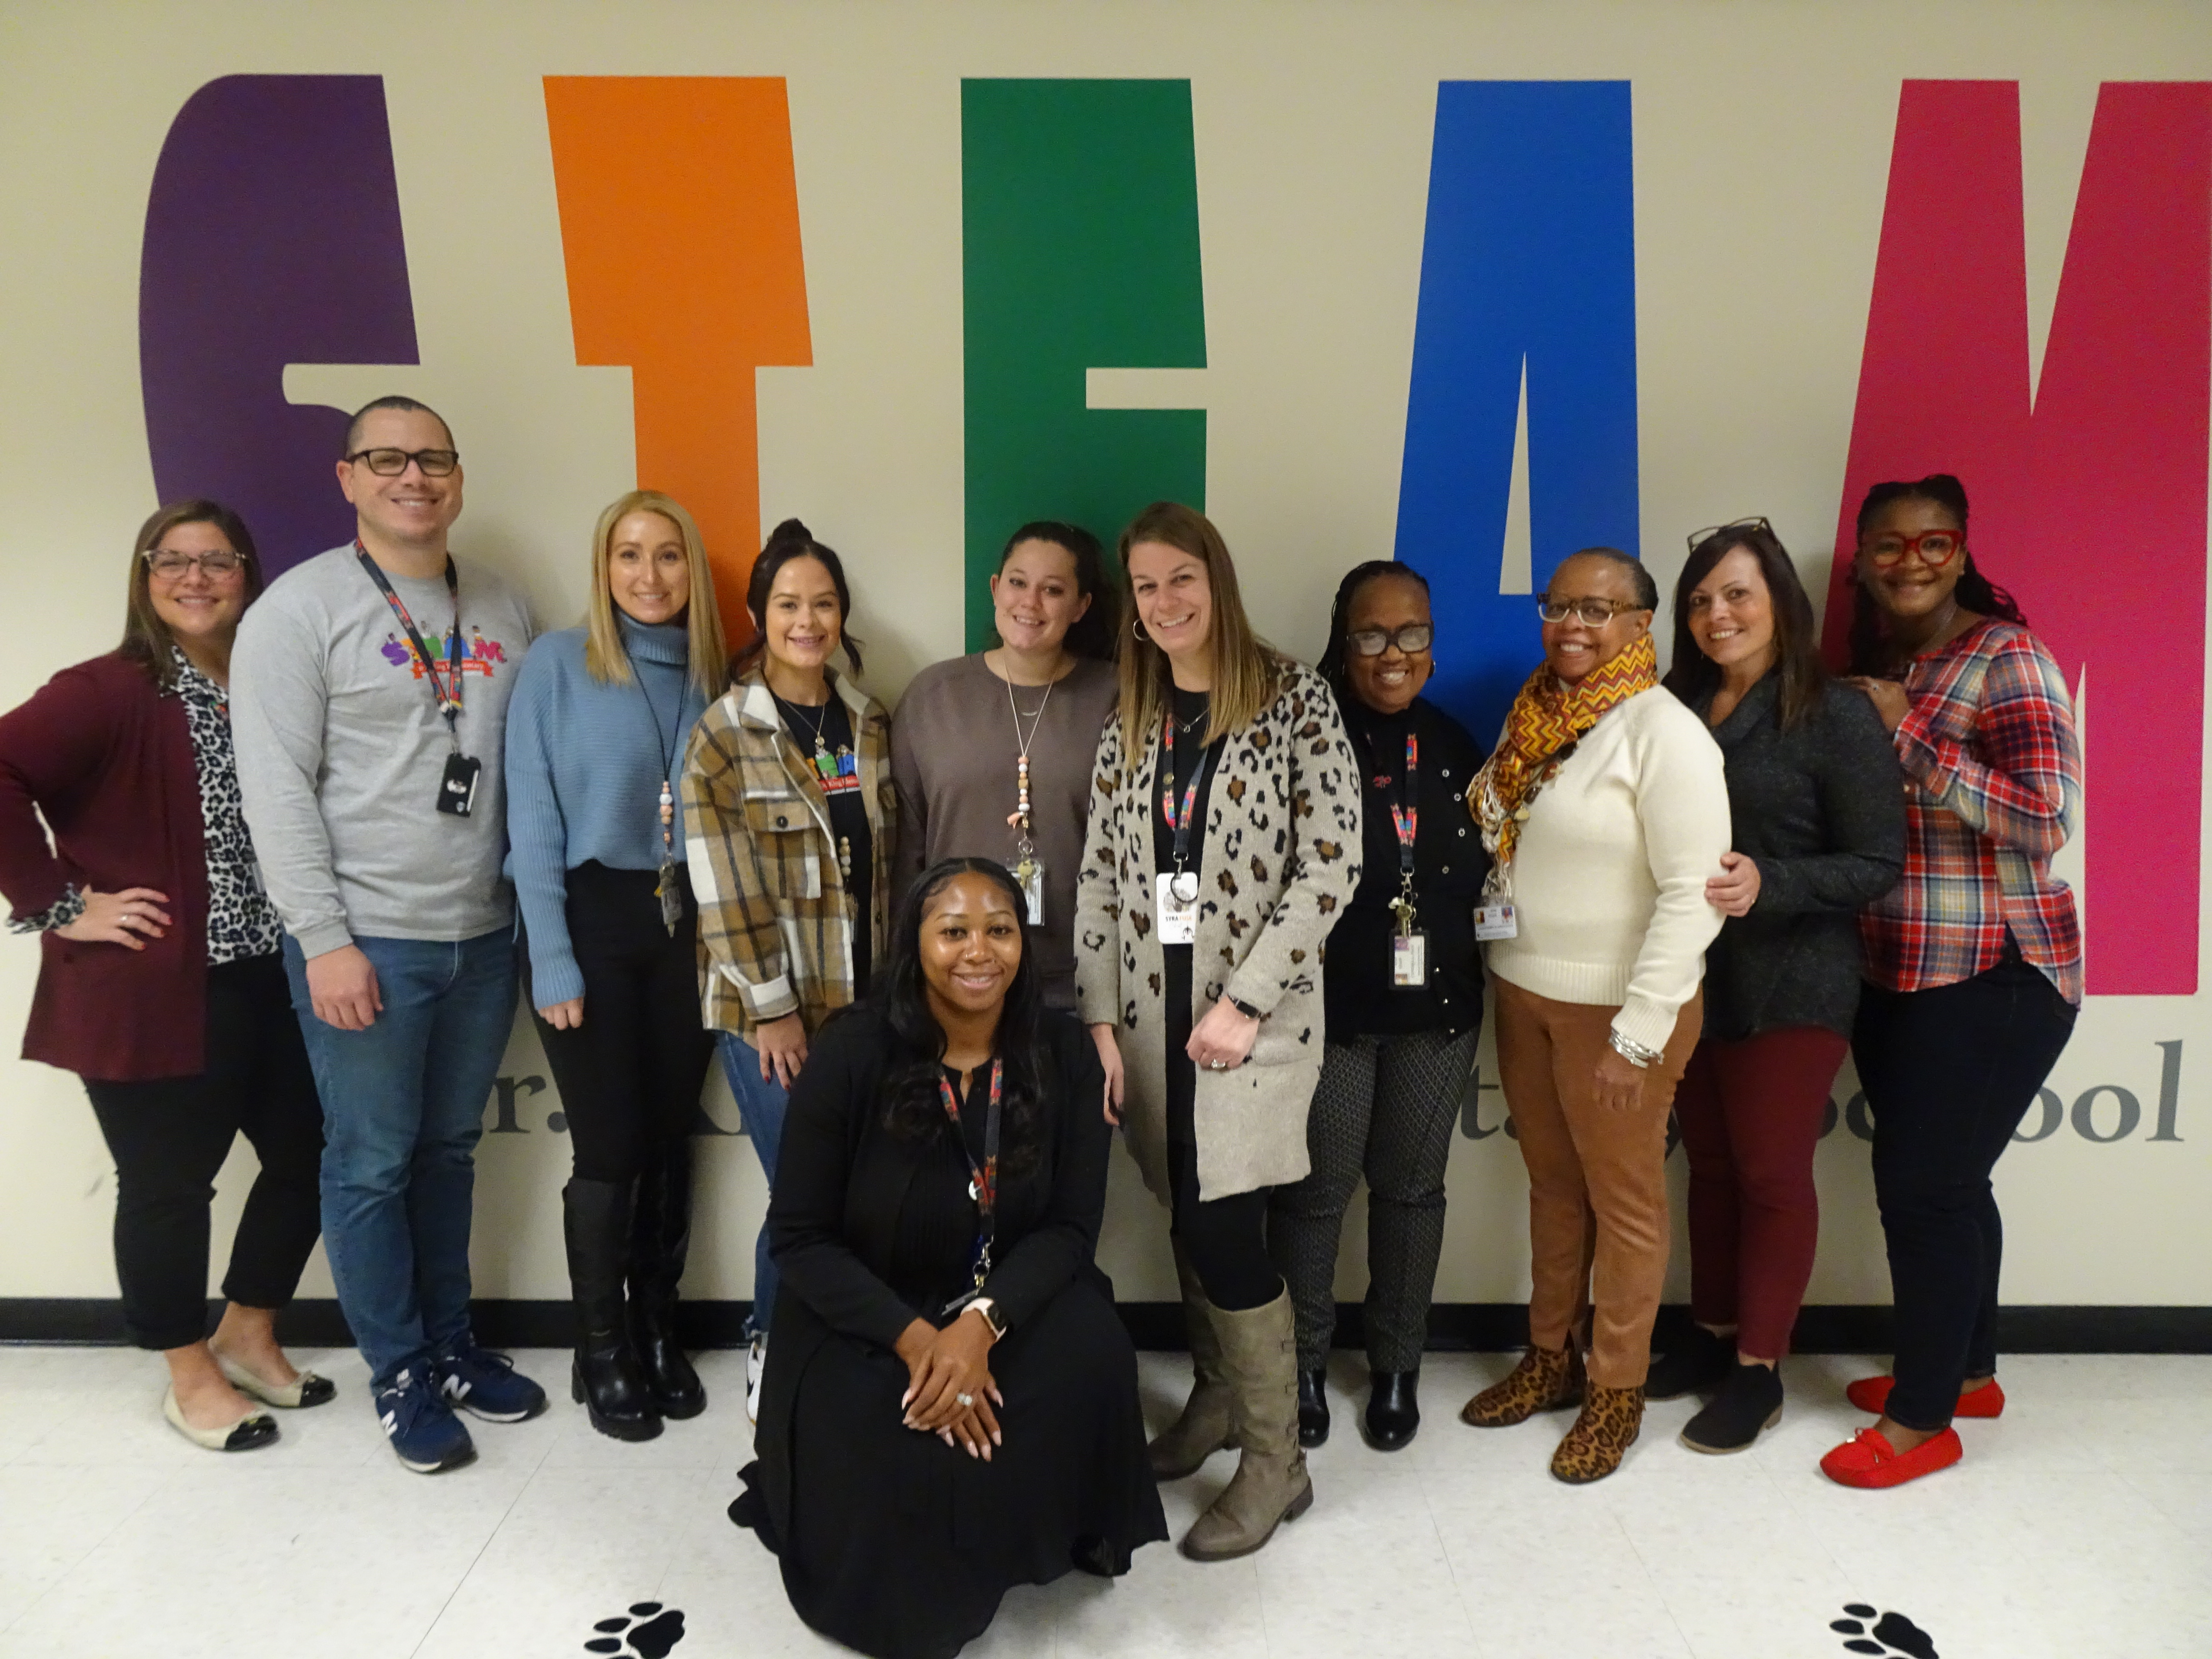 This is a photo of the Equity Team at STEAM at Dr. King, smiling at the camera.